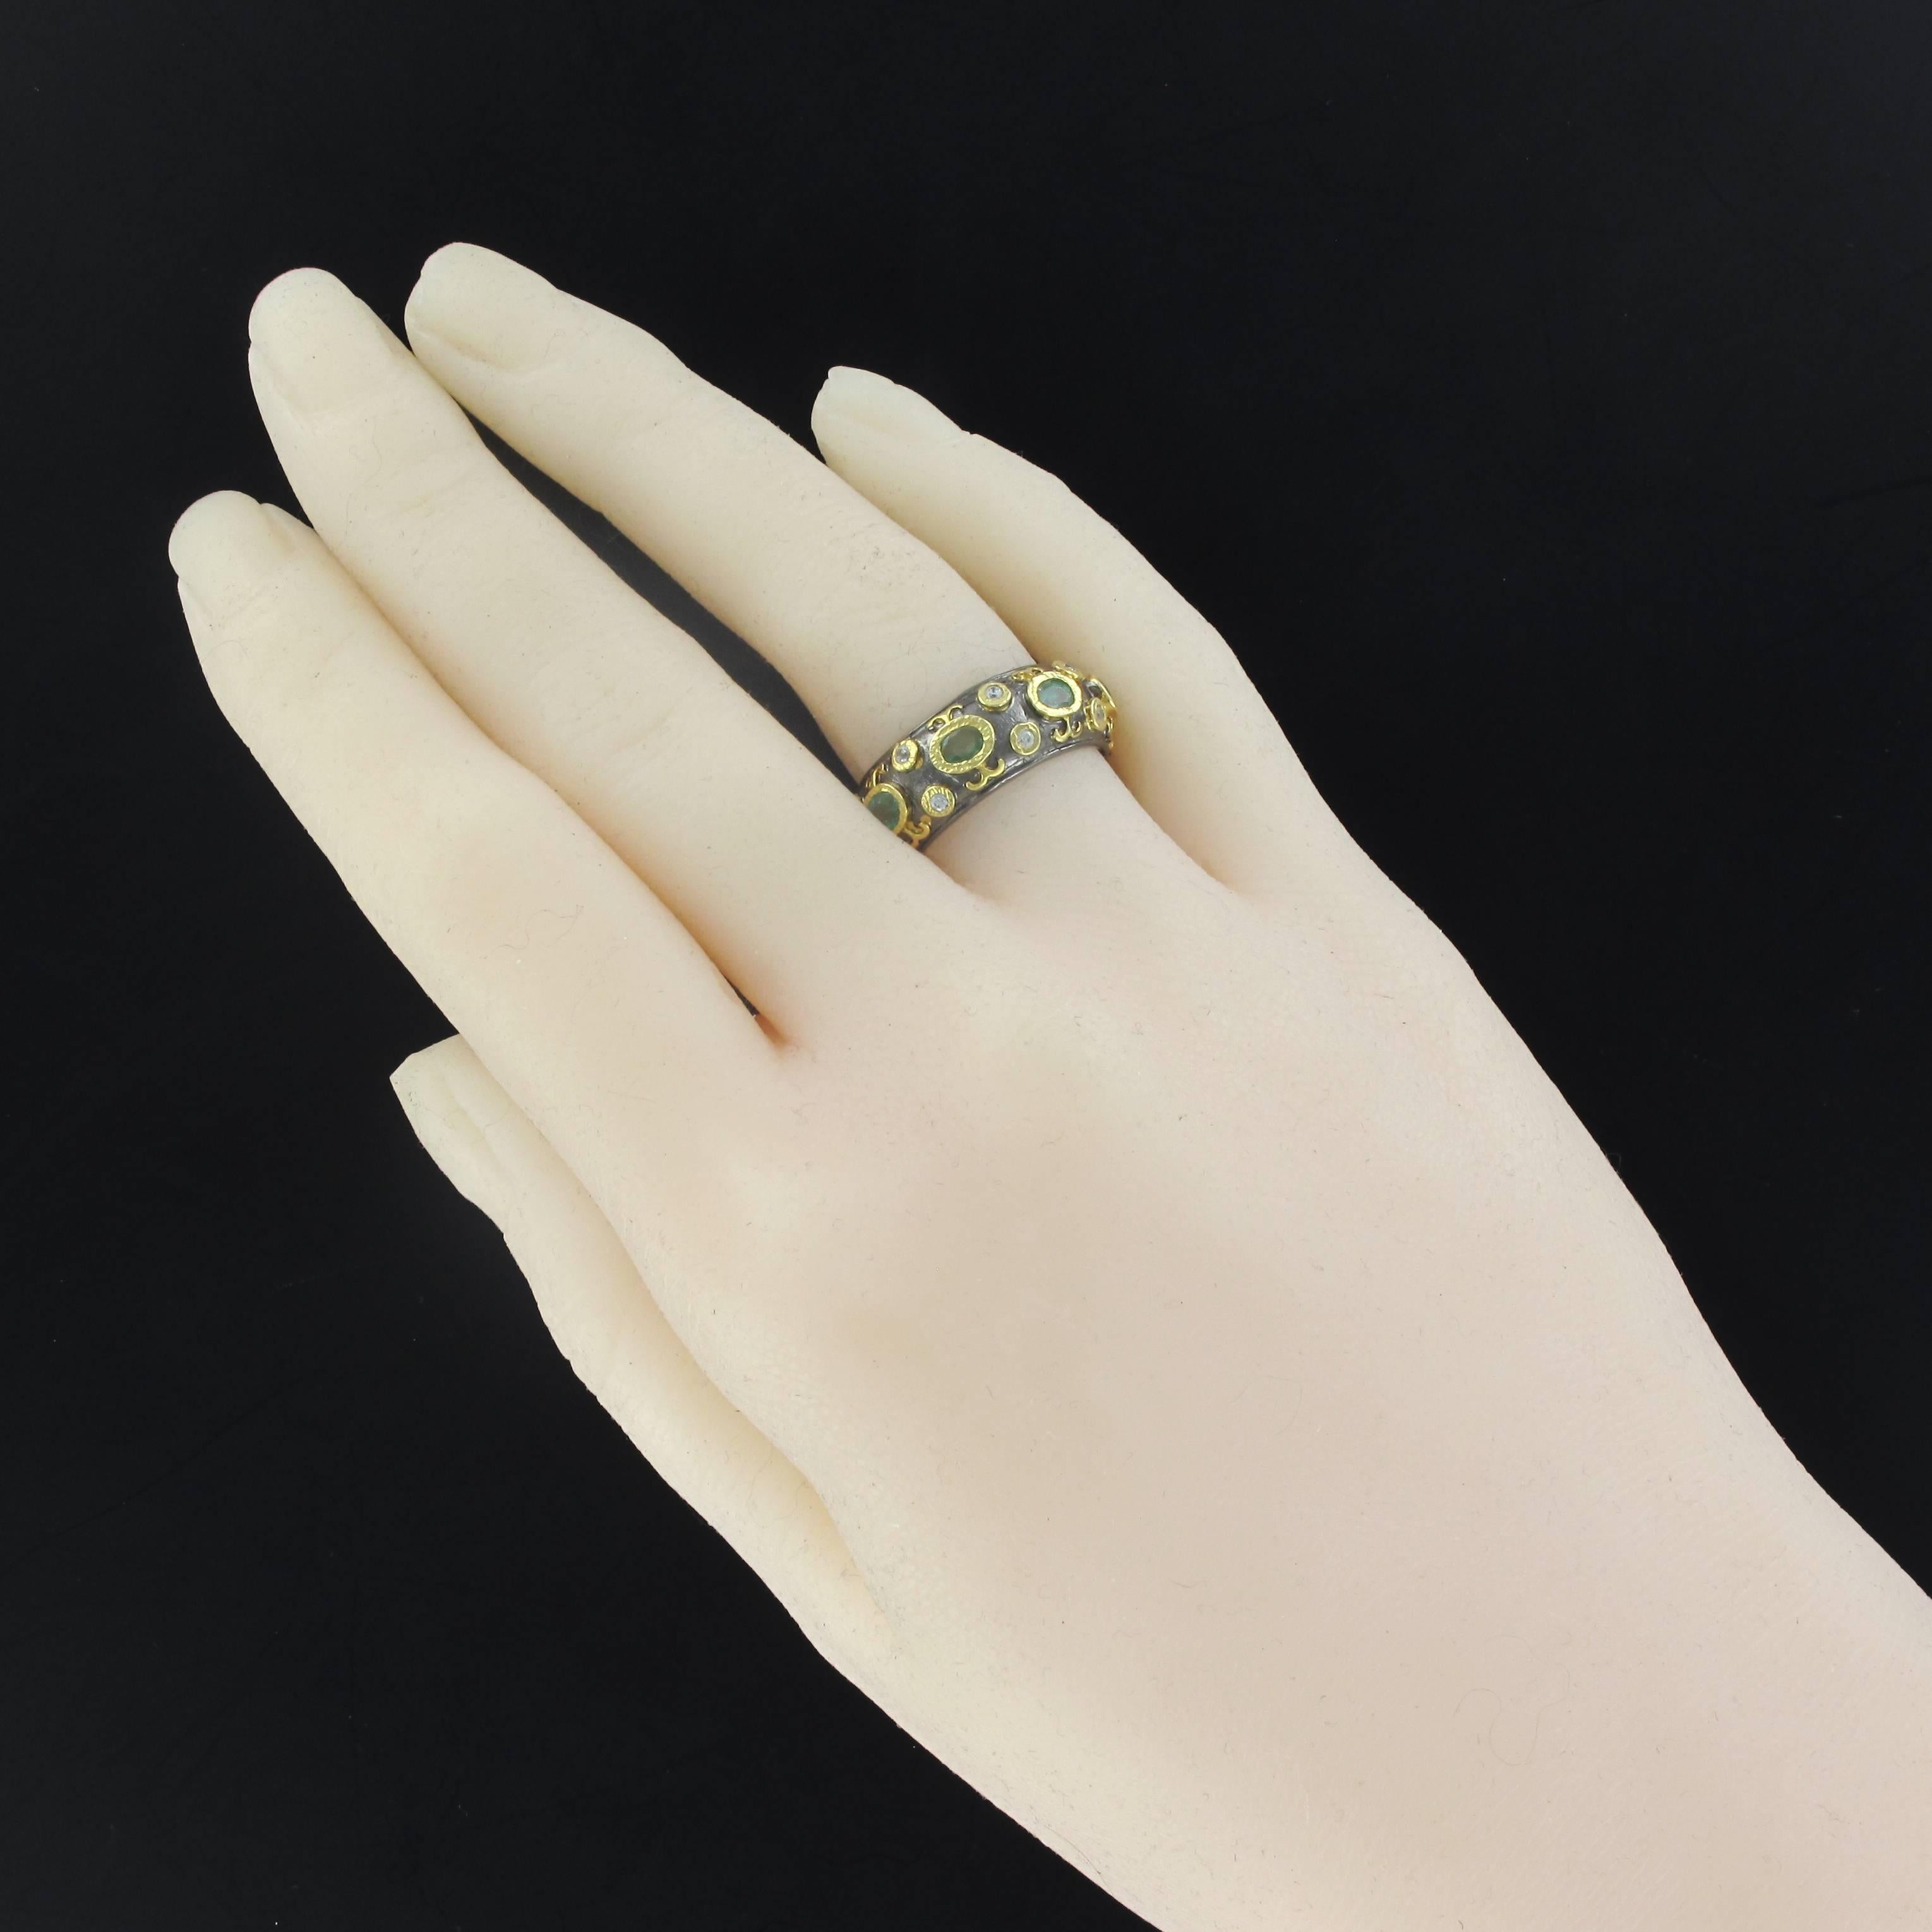 Ring in silver, 925 black rhodium-plated.
This rounded bangle ring is closed set on its top with an alternace of white topaz and emeralds, the whole set with a chiseled closed and rhodium plated yellow gold.
Total weight of emeralds: about 2.86